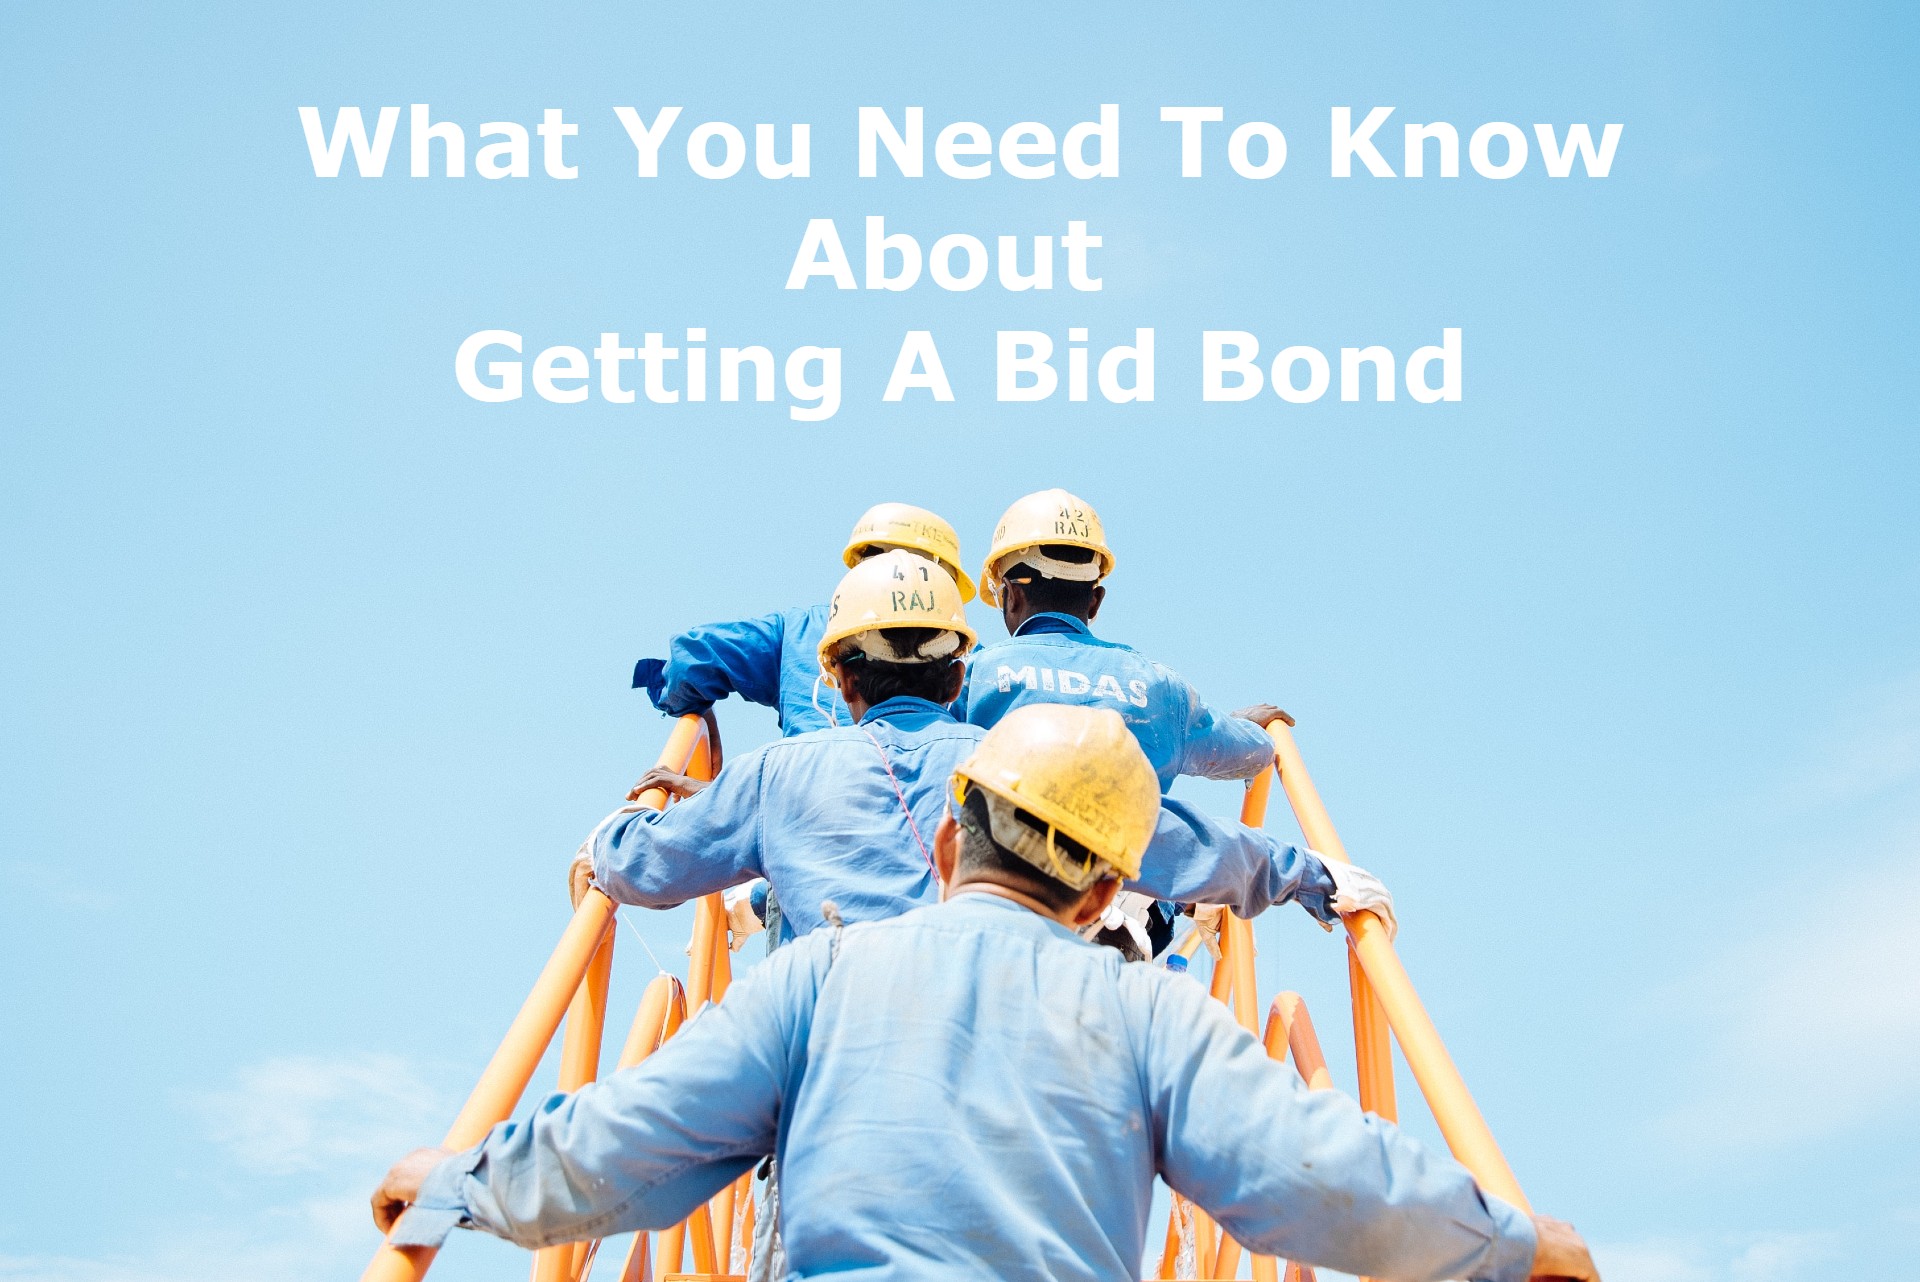 bid bond - what credit score do you need to get a bid bond - contractors climbing a stair